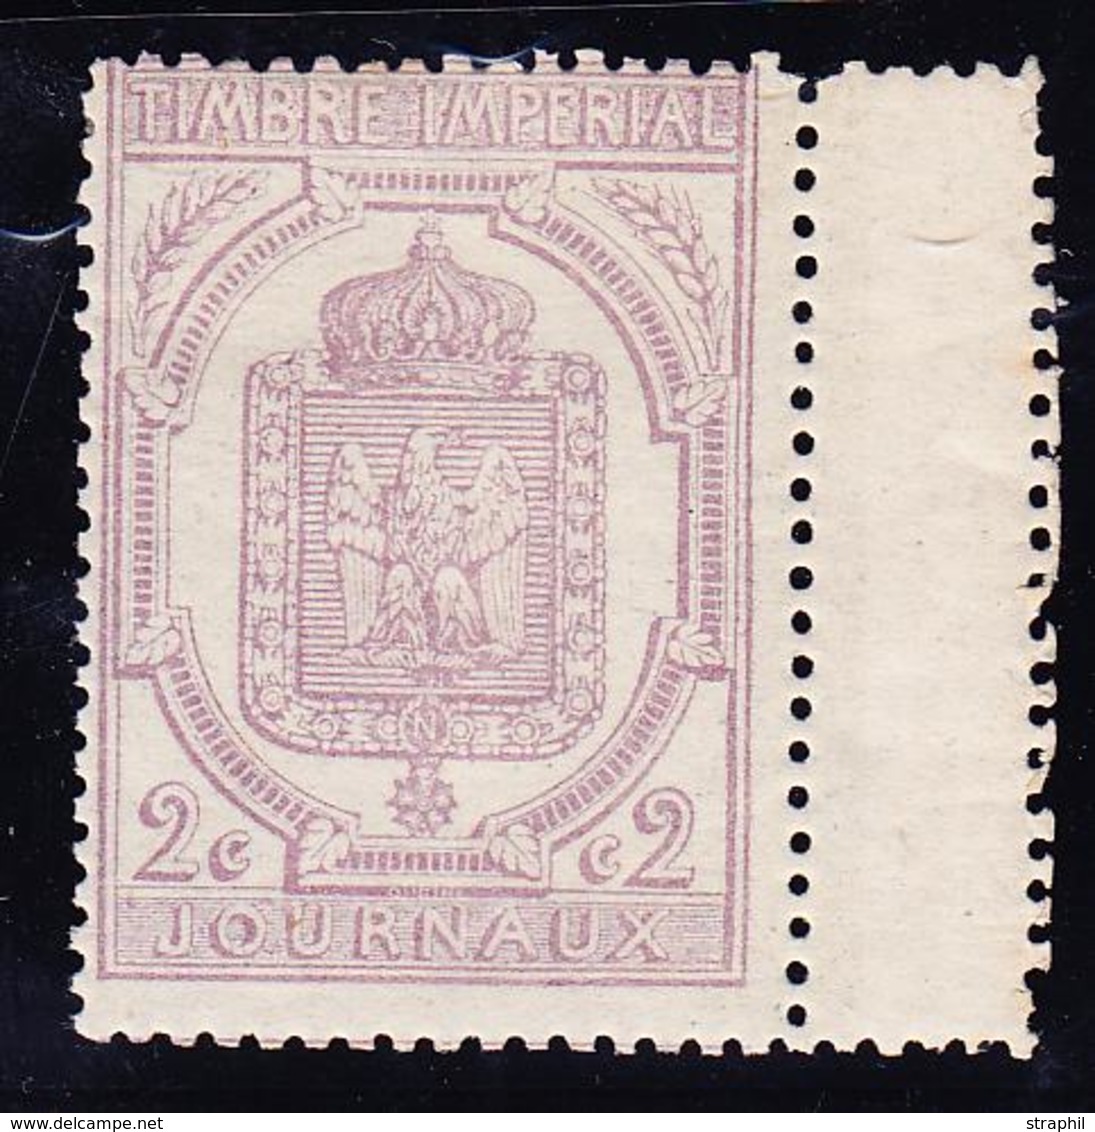 ** TIMBRES JOURNAUX - ** - N°7 - 2c Violet + Interpanneau - TB - Newspapers